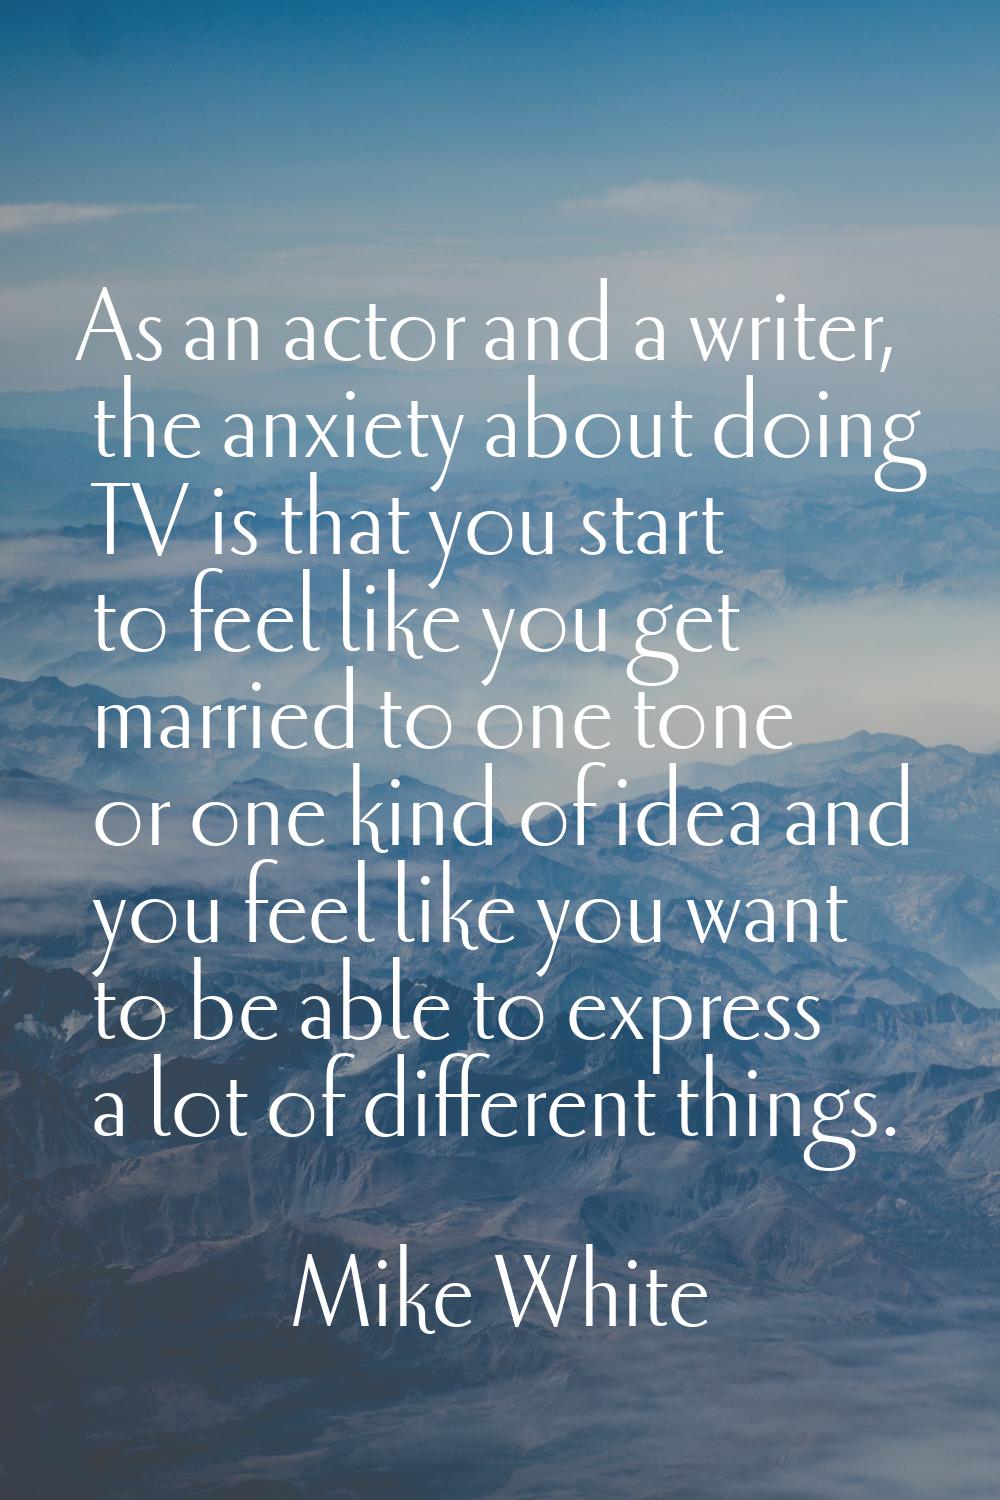 As an actor and a writer, the anxiety about doing TV is that you start to feel like you get married